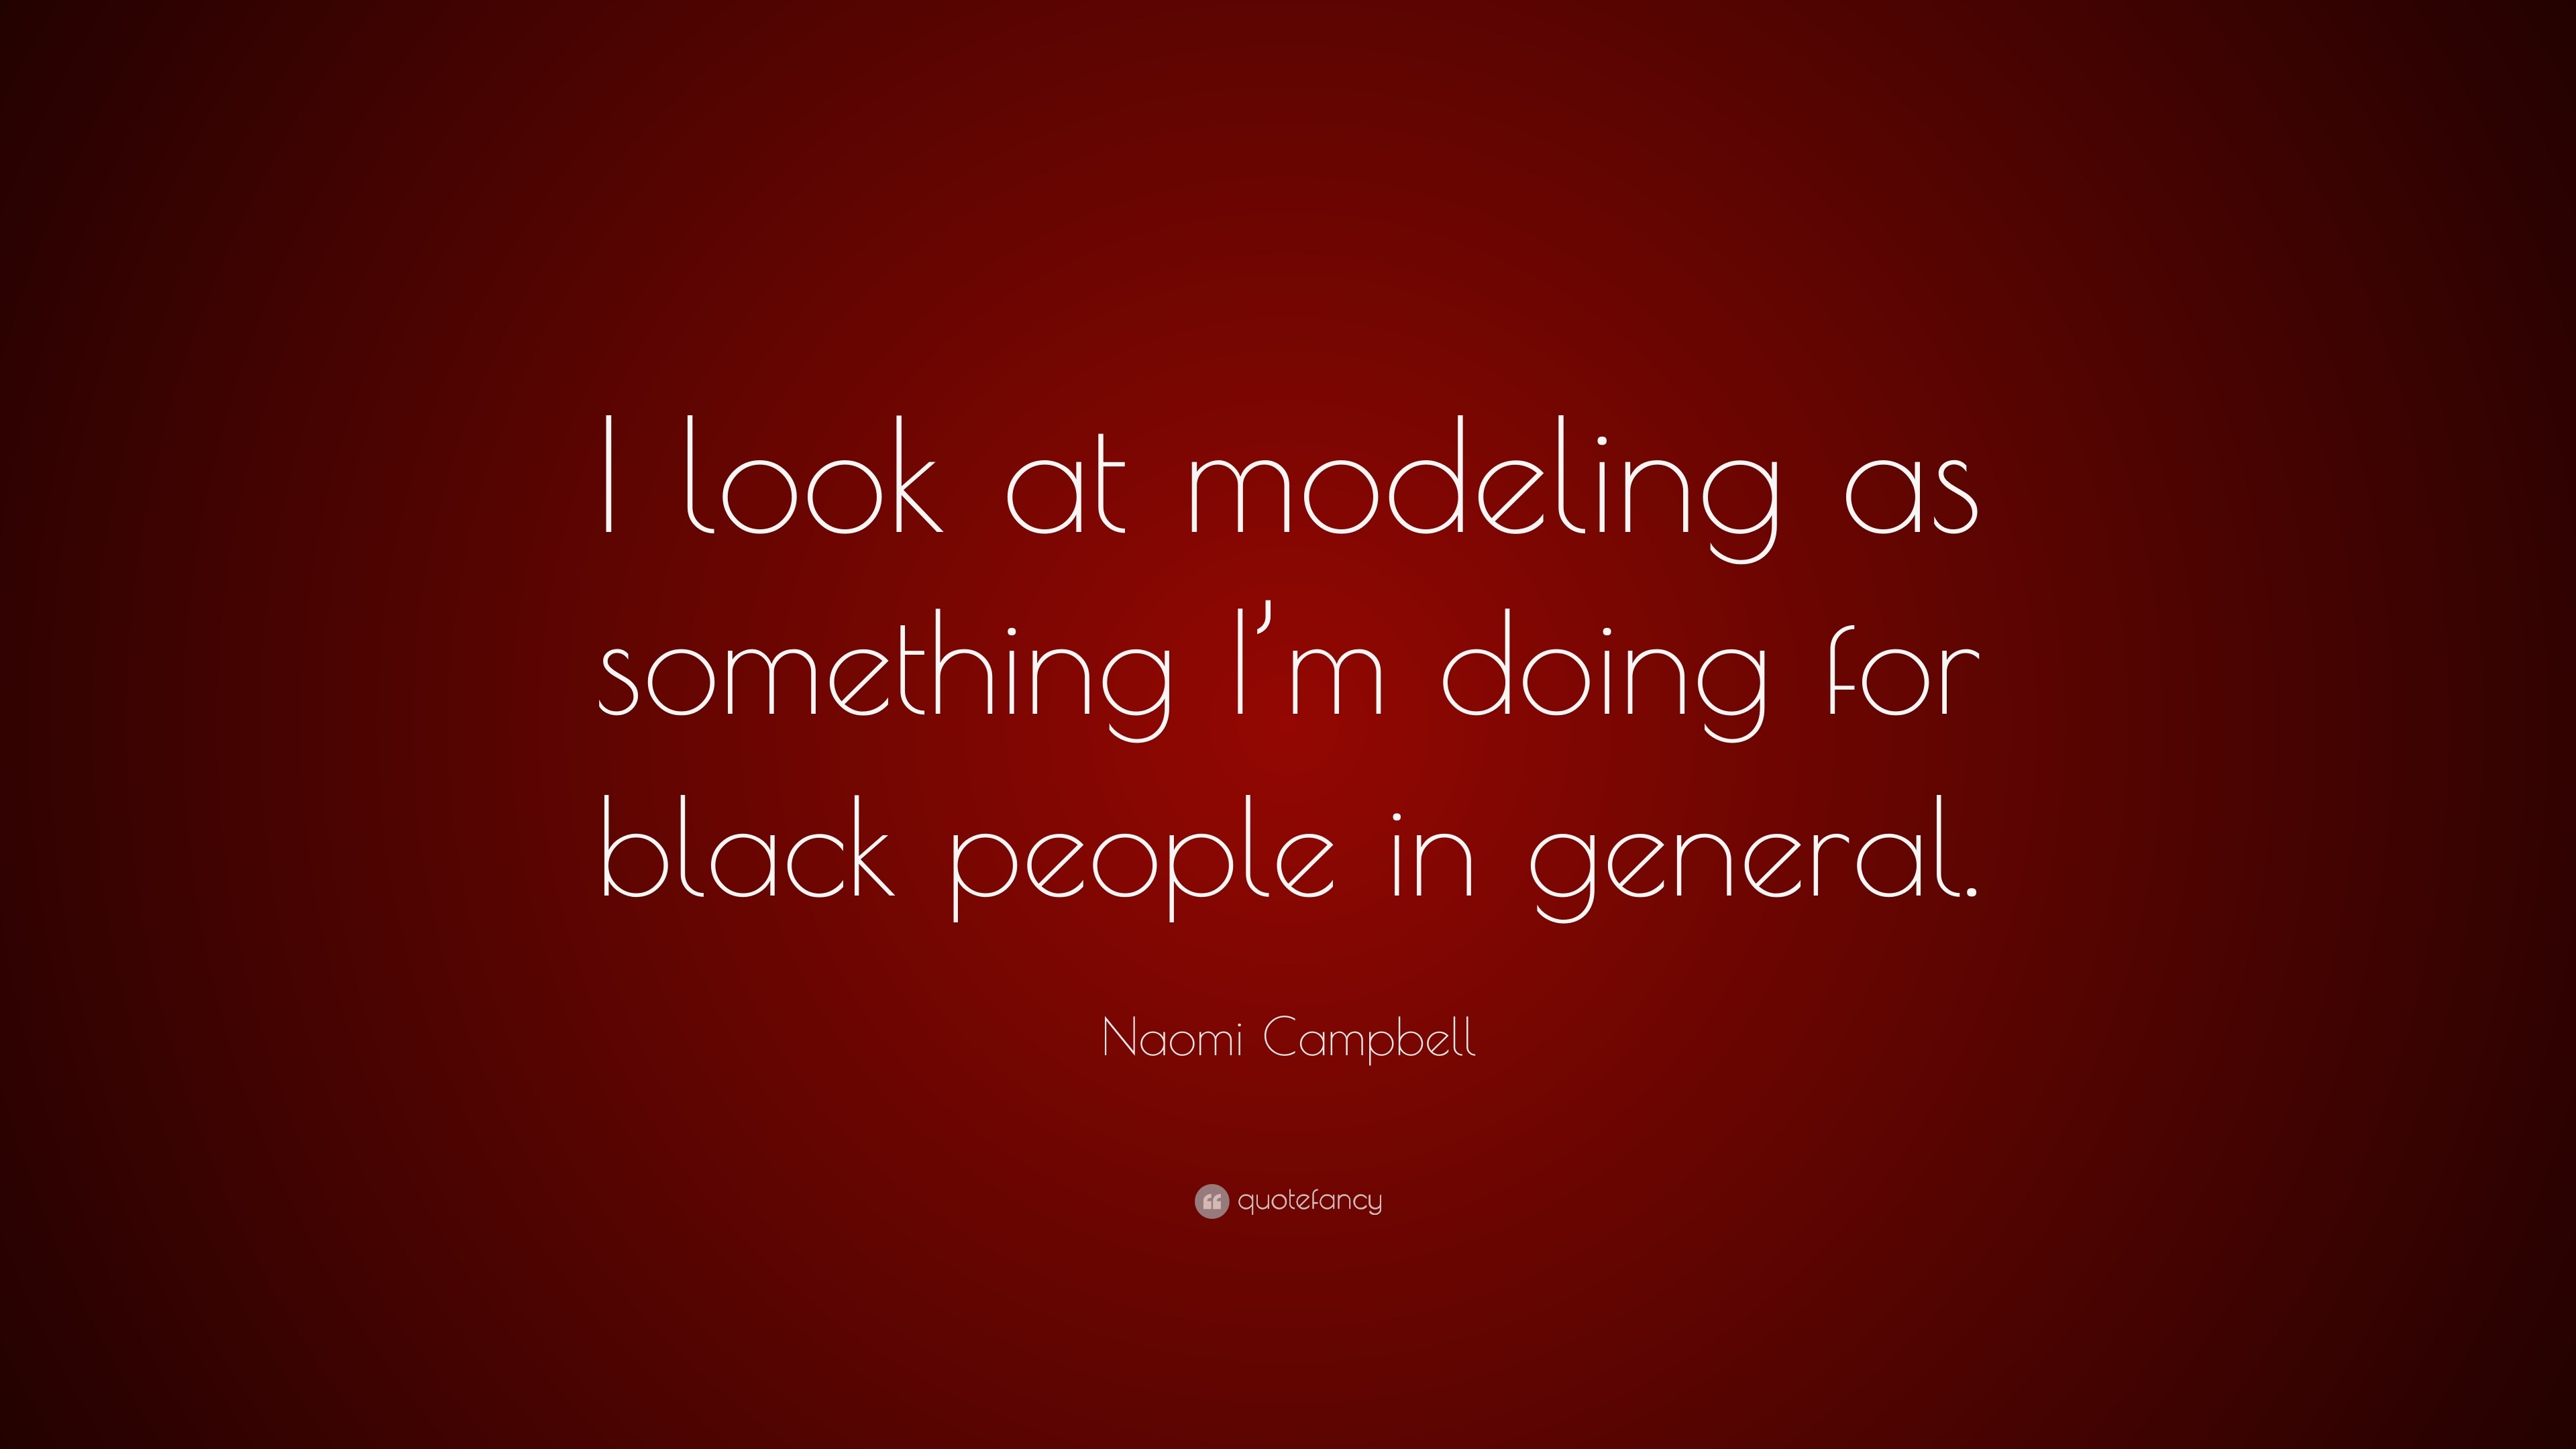 Naomi Campbell Quote: “I look at modeling as something I'm doing for black  people in